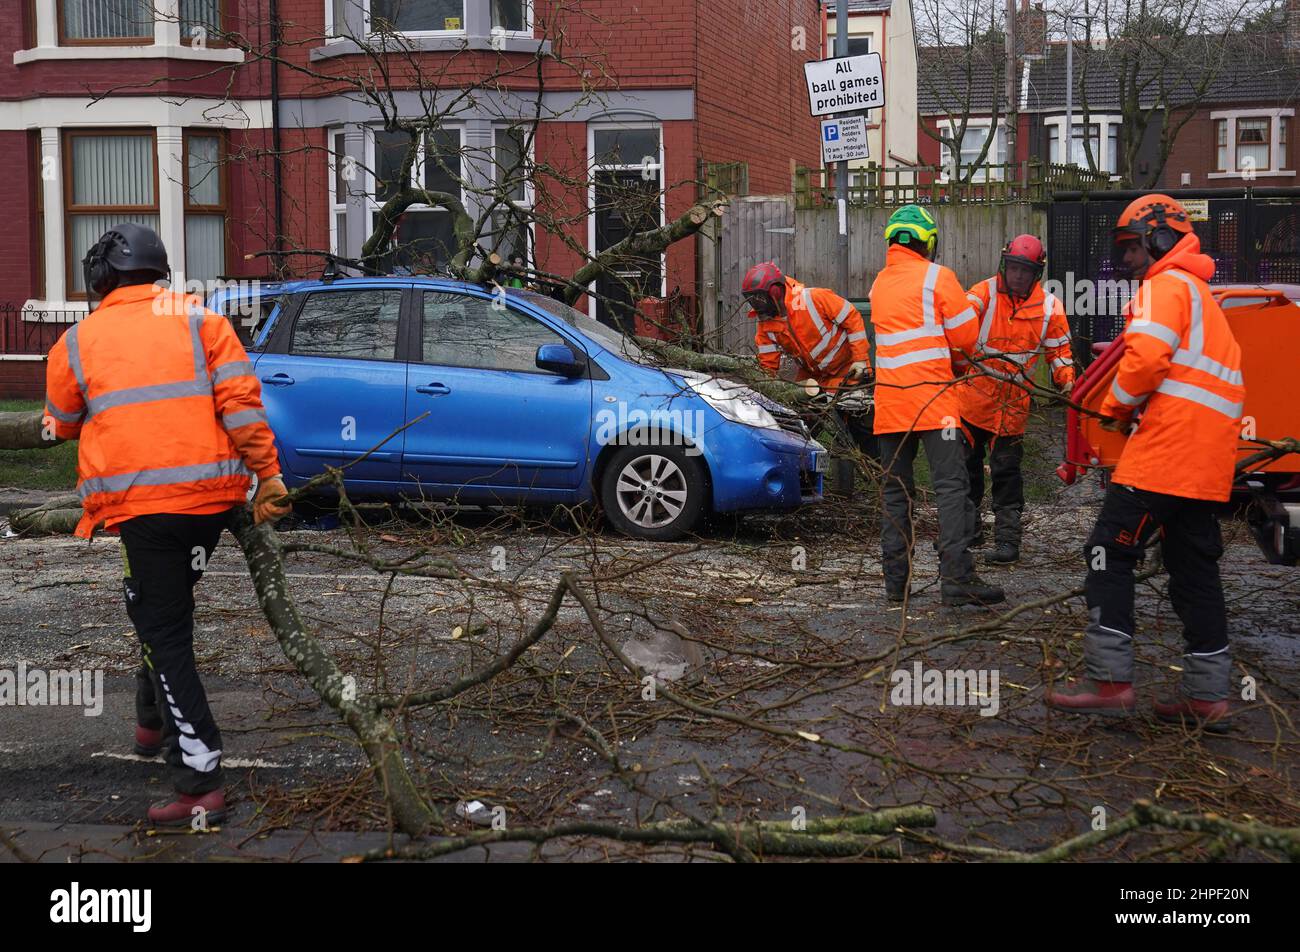 Tree surgeons clear away a fallen tree after high winds and wet weather in Liverpool as Britons have been warned to brace for strengthening winds and lashing rain as Storm Franklin moved in overnight, just days after Storm Eunice destroyed buildings and left 1.4 million homes without power. Picture date: Monday February 21, 2022. Stock Photo